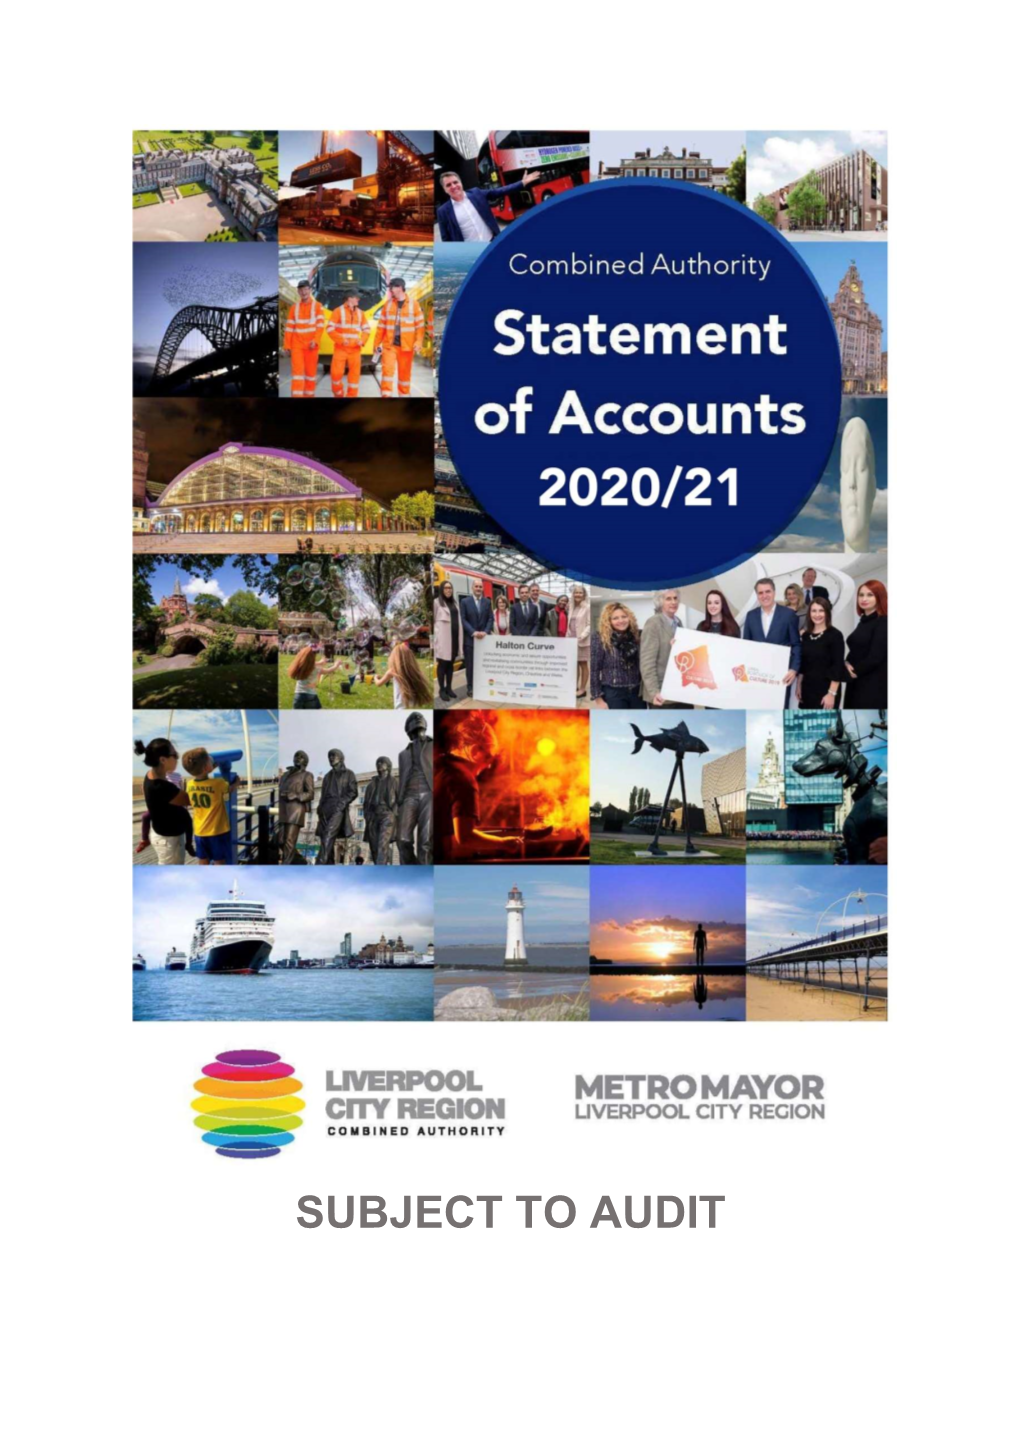 Subject to Audit